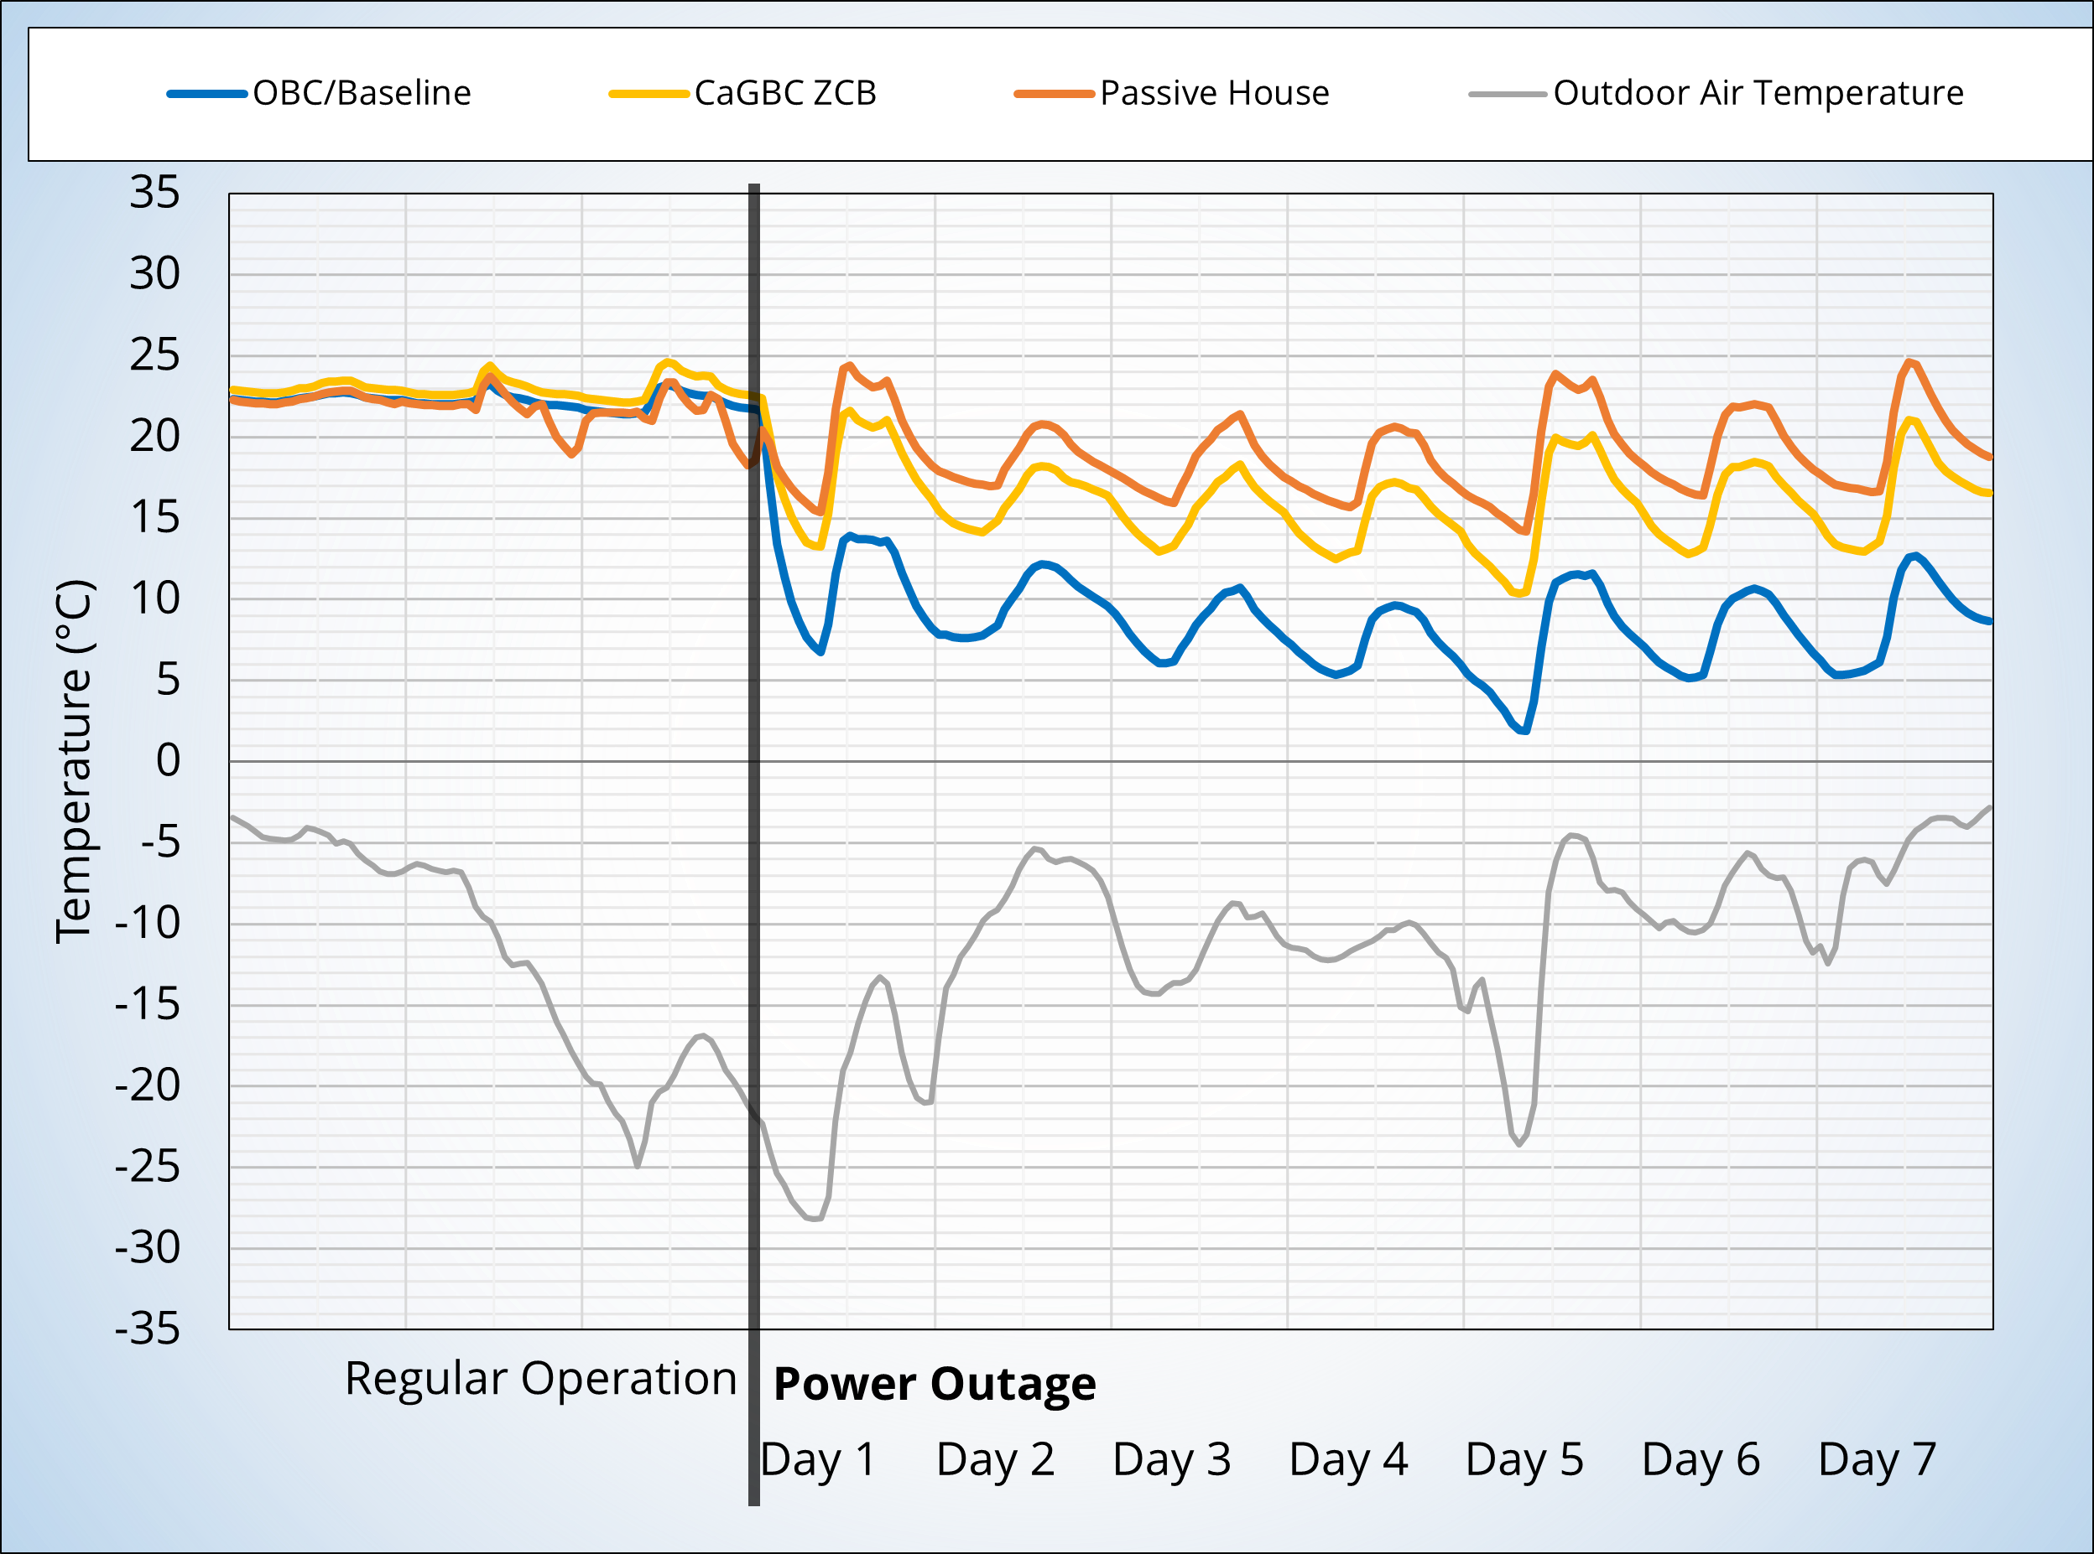 Operative Temperatures During Winter Power Outage